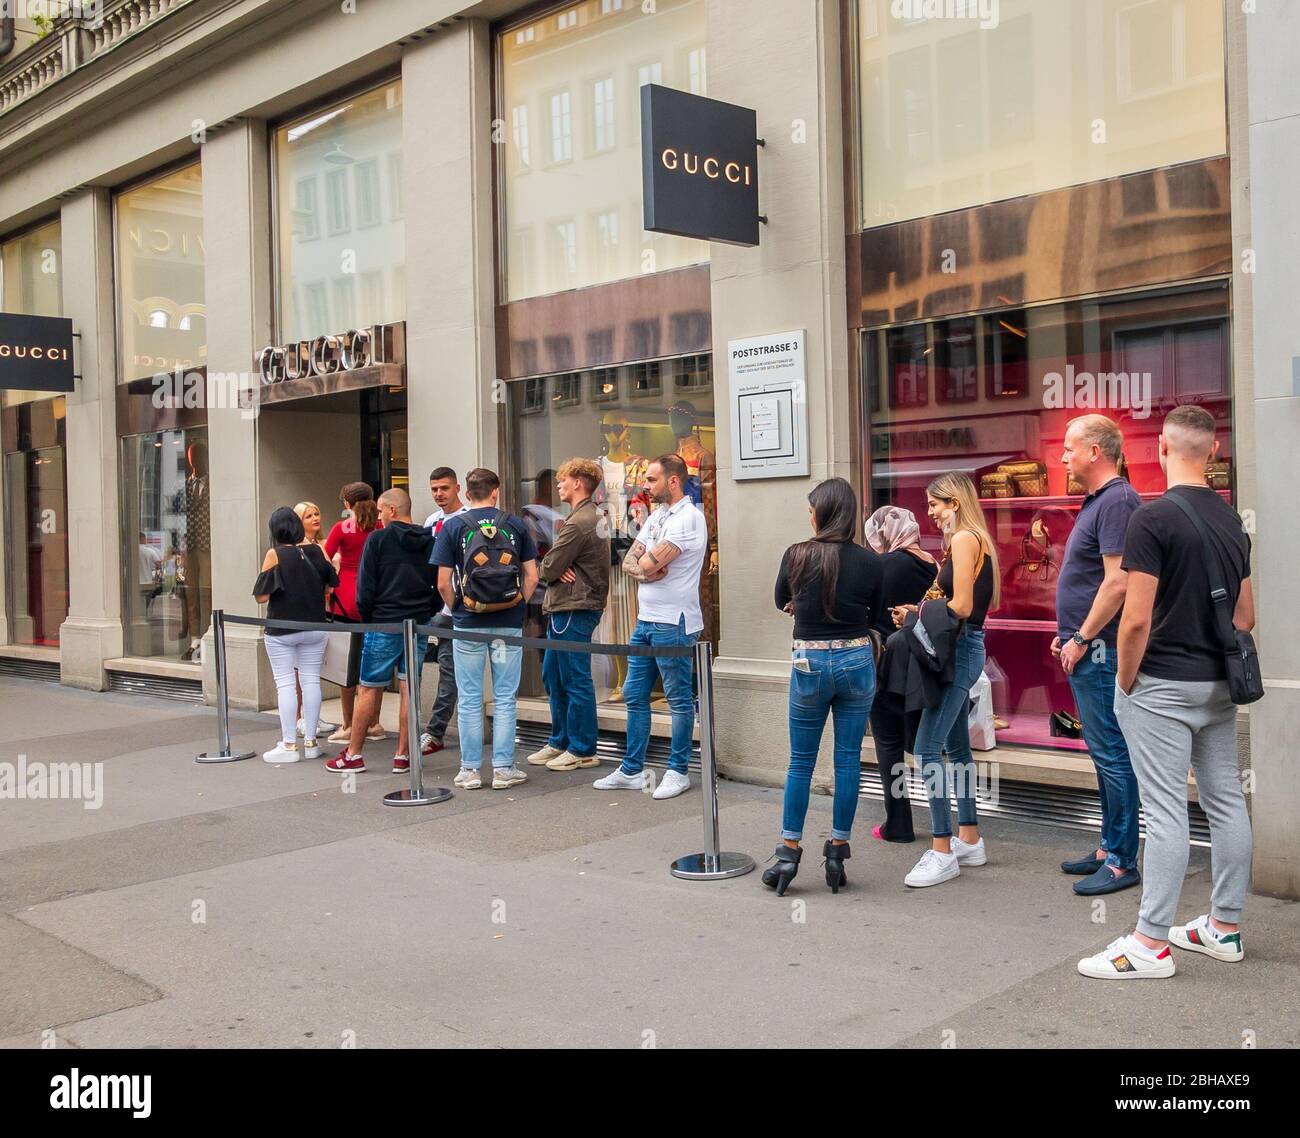 Zurich, Switzerland - August 13, 2019: Buyers waiting in line to visit Gucci  store during sale time Stock Photo - Alamy